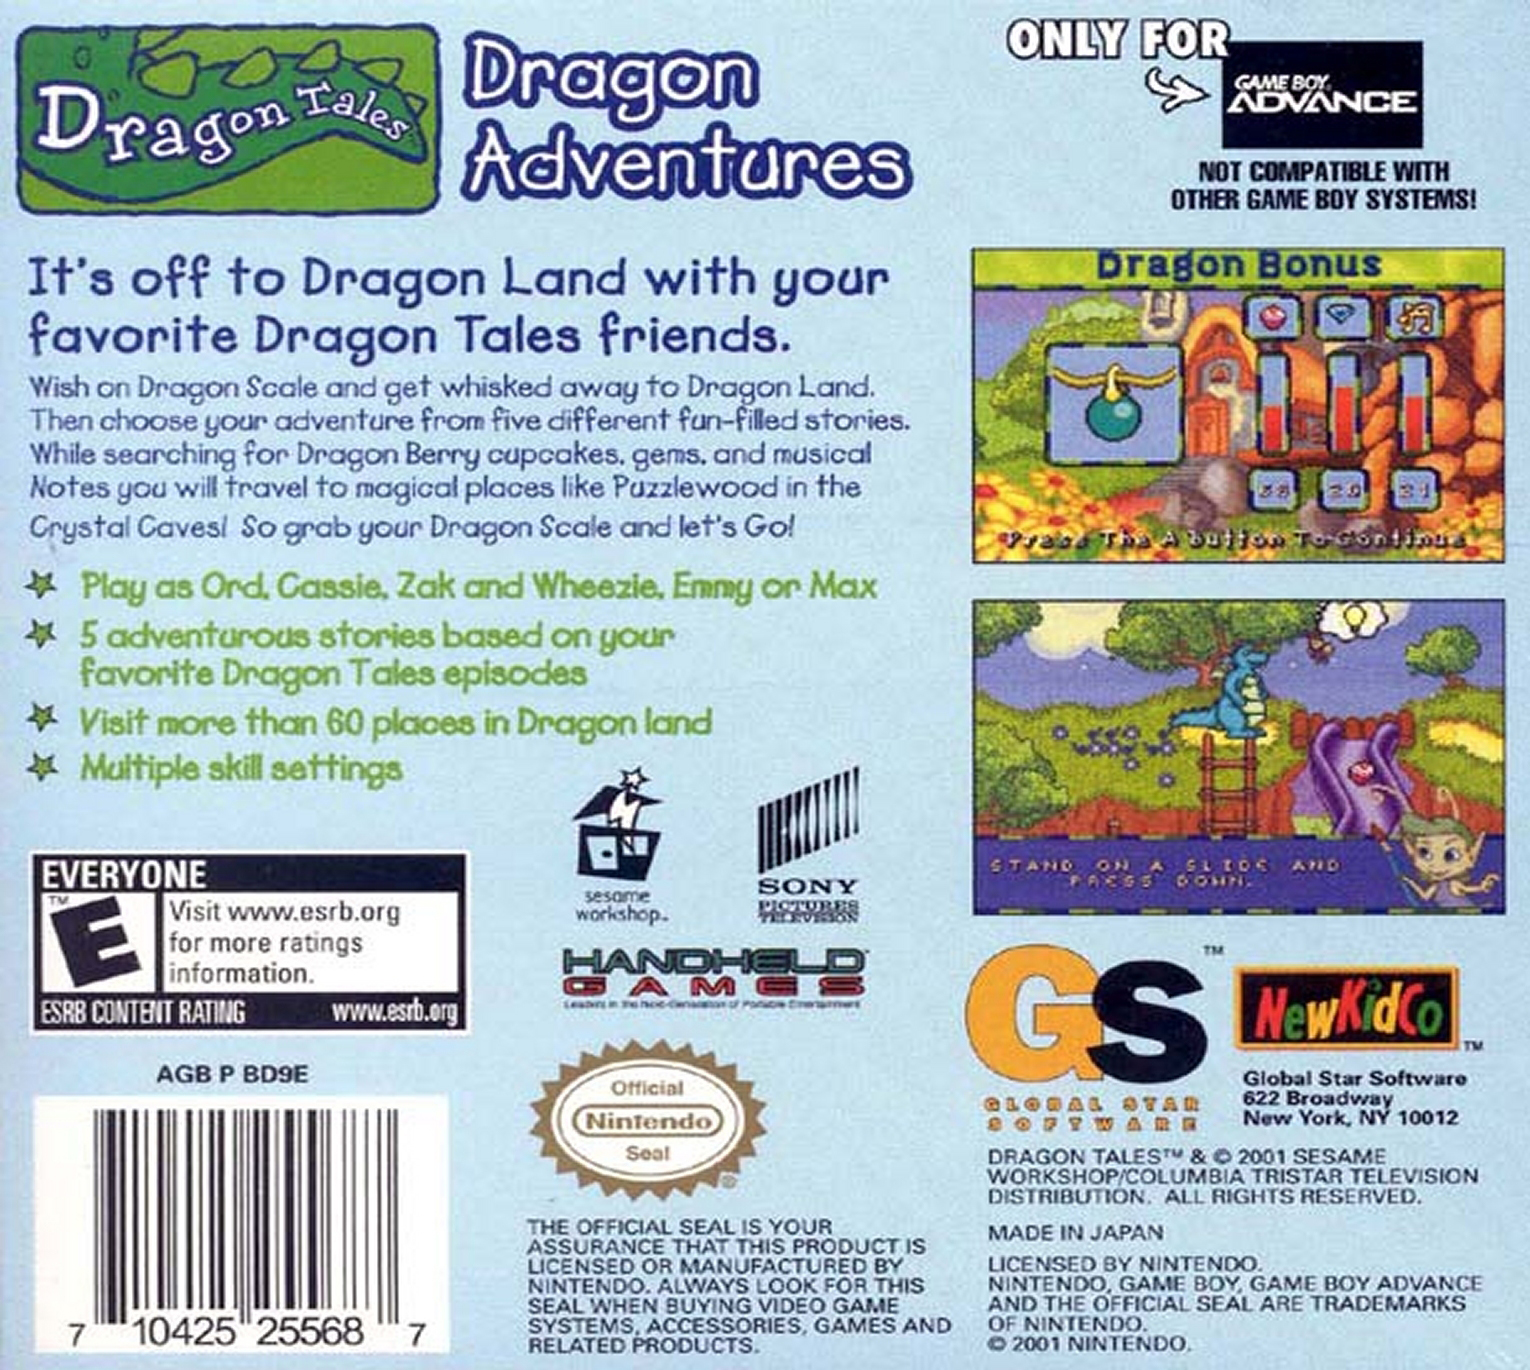 View, Download, Rate, and Comment on this Dragon Tales: Dragon Adventures V...